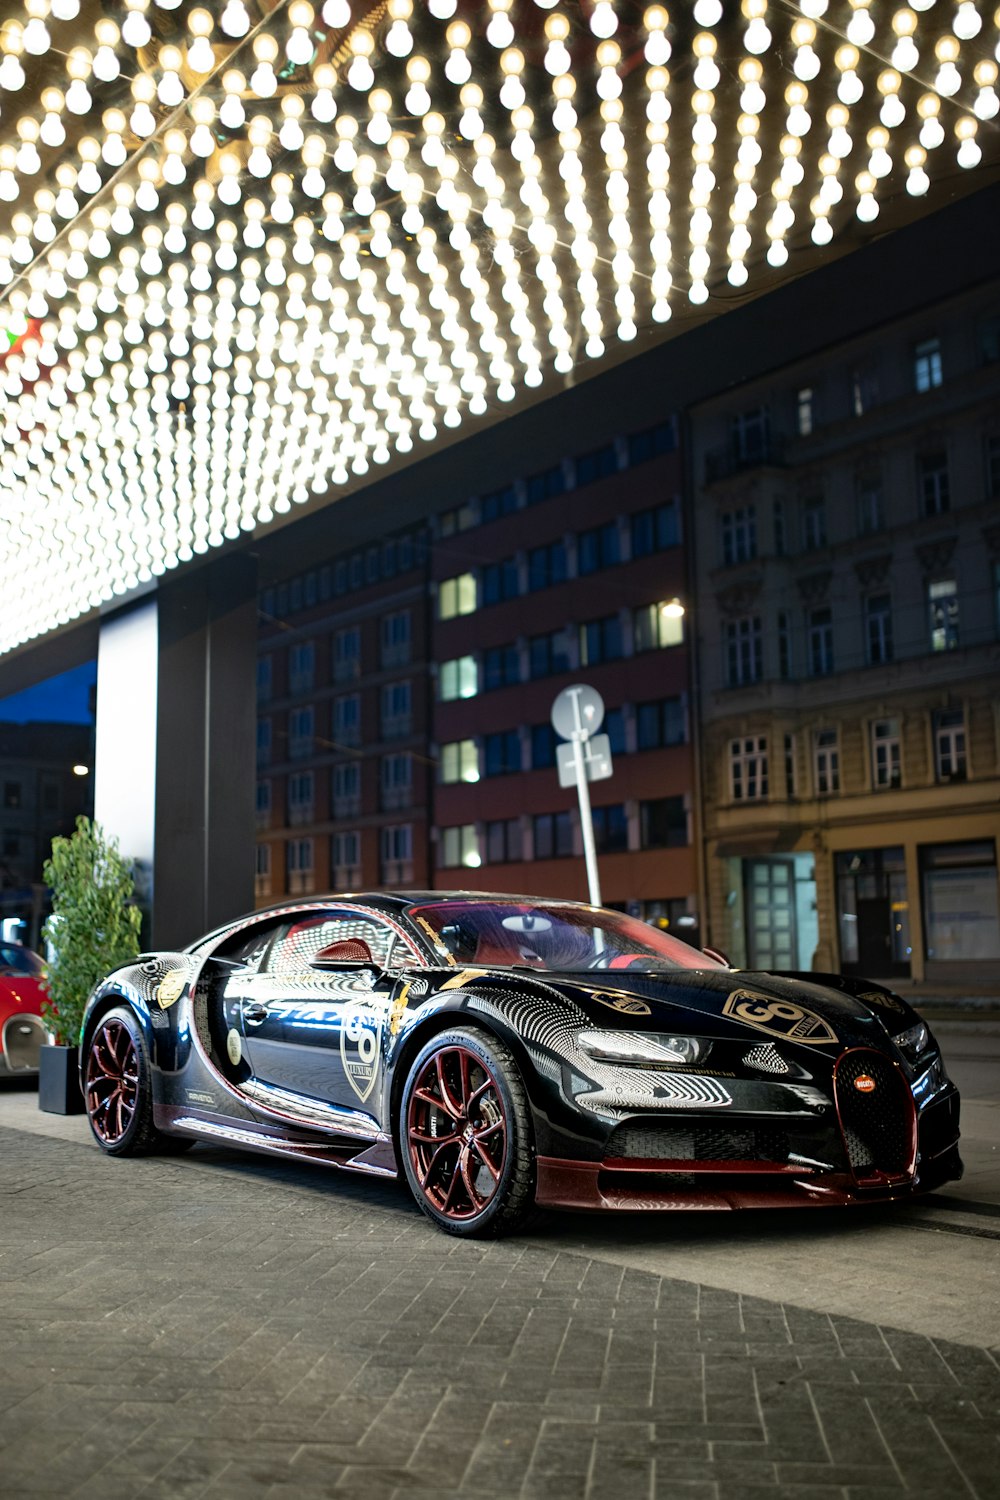 a bugatti car parked in front of a building